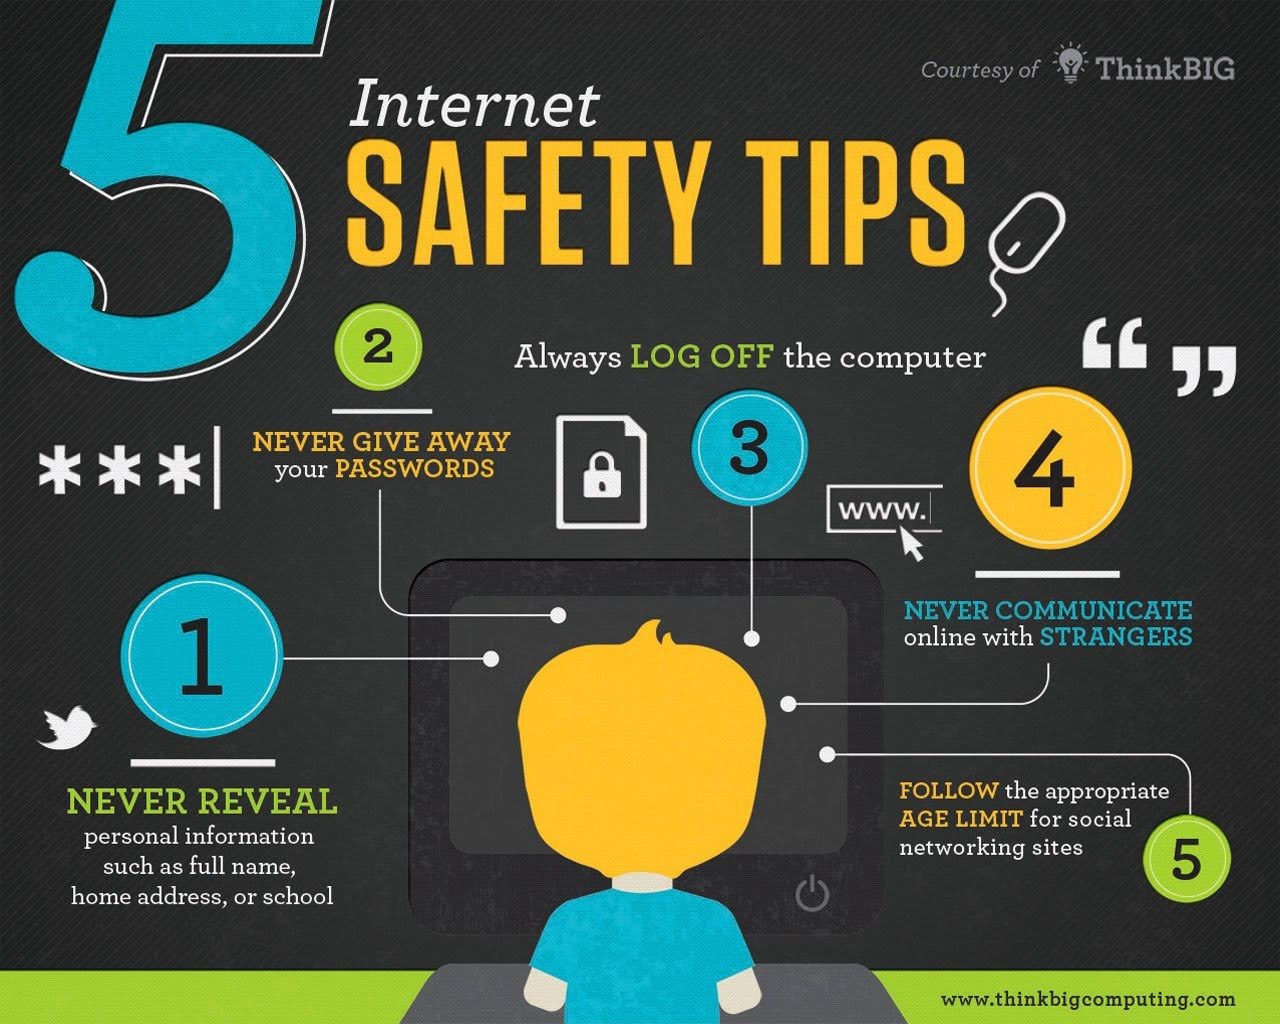 Five internet safety tips for teachers keeping their students safe online.